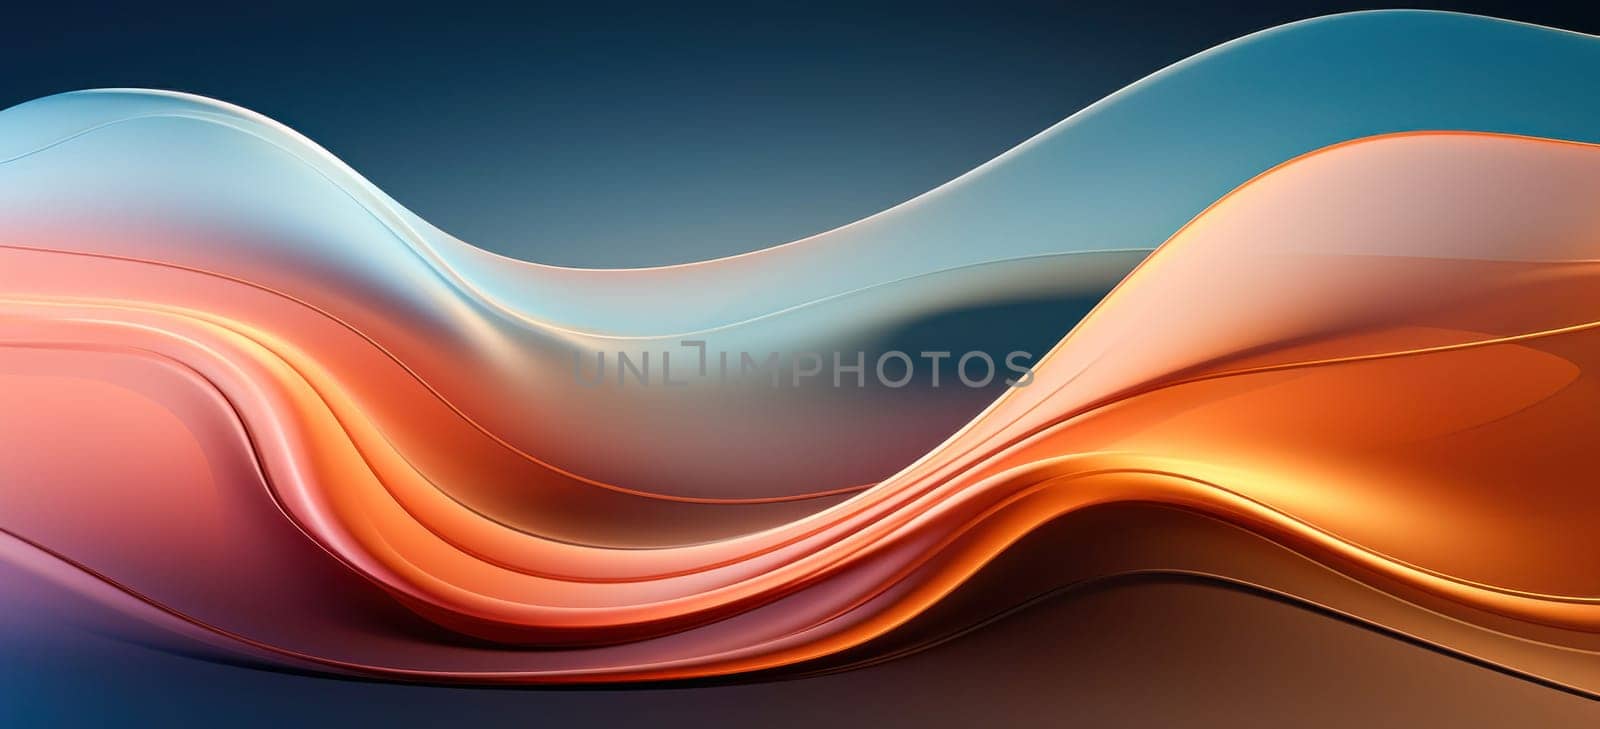 Bright and dynamic abstract background with colorful wavy pattern with bright and vibrant elements. Perfect for adding energy and excitement to a design.